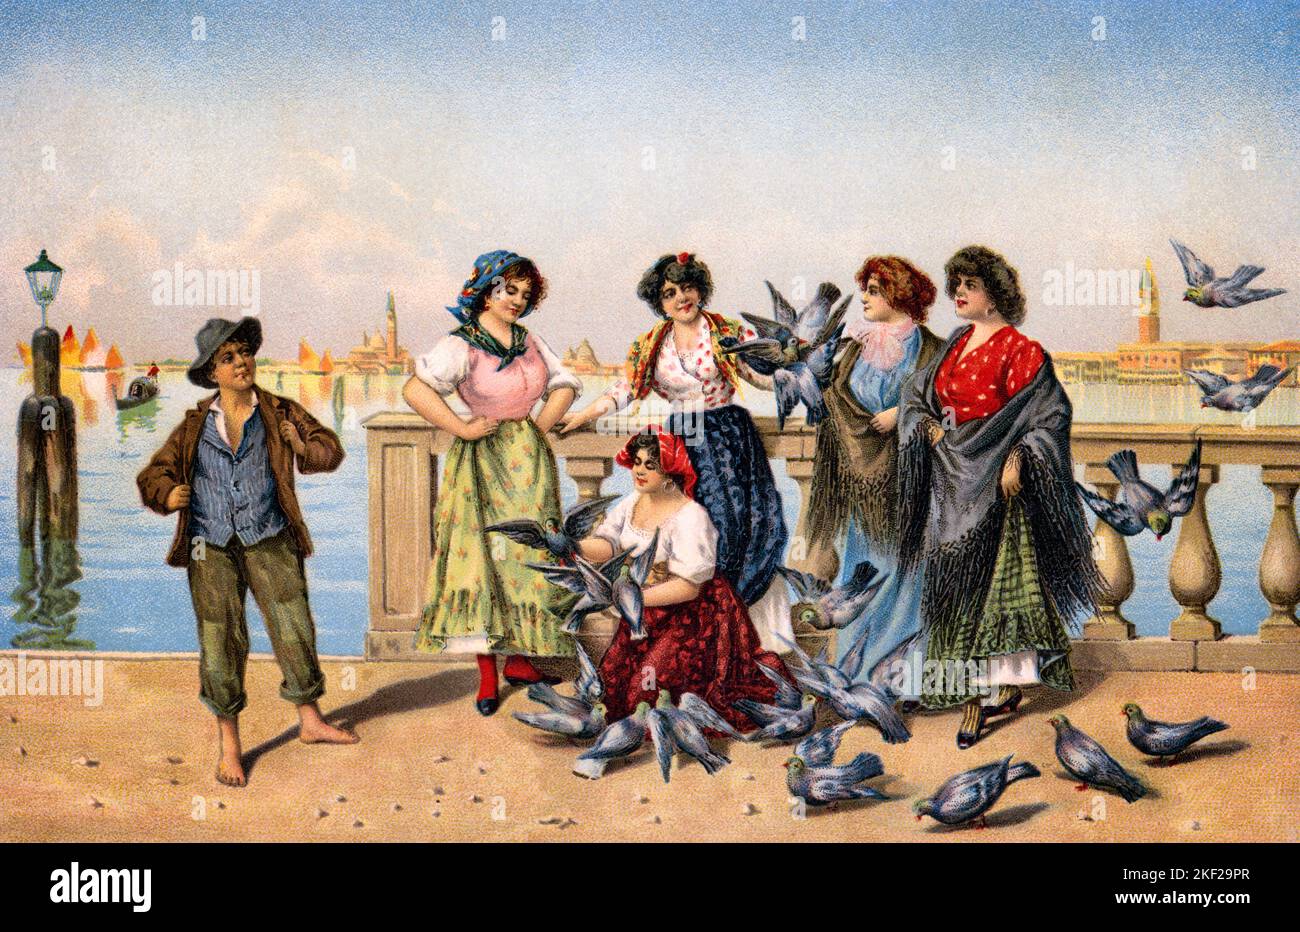 1910s CITIZENS OF VENICE IN TYPICAL COSTUMES ALONG THE CANAL WOMAN WITH PIGEONS AND DOVES AFTER VITTORIO TESSARI  - ka9459 HAR001 HARS FRIENDSHIP LADIES PERSONS MALES VENETIAN EUROPE WING HAPPINESS EUROPEAN LEISURE AND ALONG COMMON ITALY VENICE FACIAL HAIR DERIVATIVE FRIENDLY POSTCARD STYLISH WARM-BLOODED BEARDS CANAL DOVES FEATHERED JUVENILES PIGEONS TYPICAL WINGED BIPEDAL CAUCASIAN ETHNICITY CITIZENS EGG-LAYING HAR001 OLD FASHIONED Stock Photo